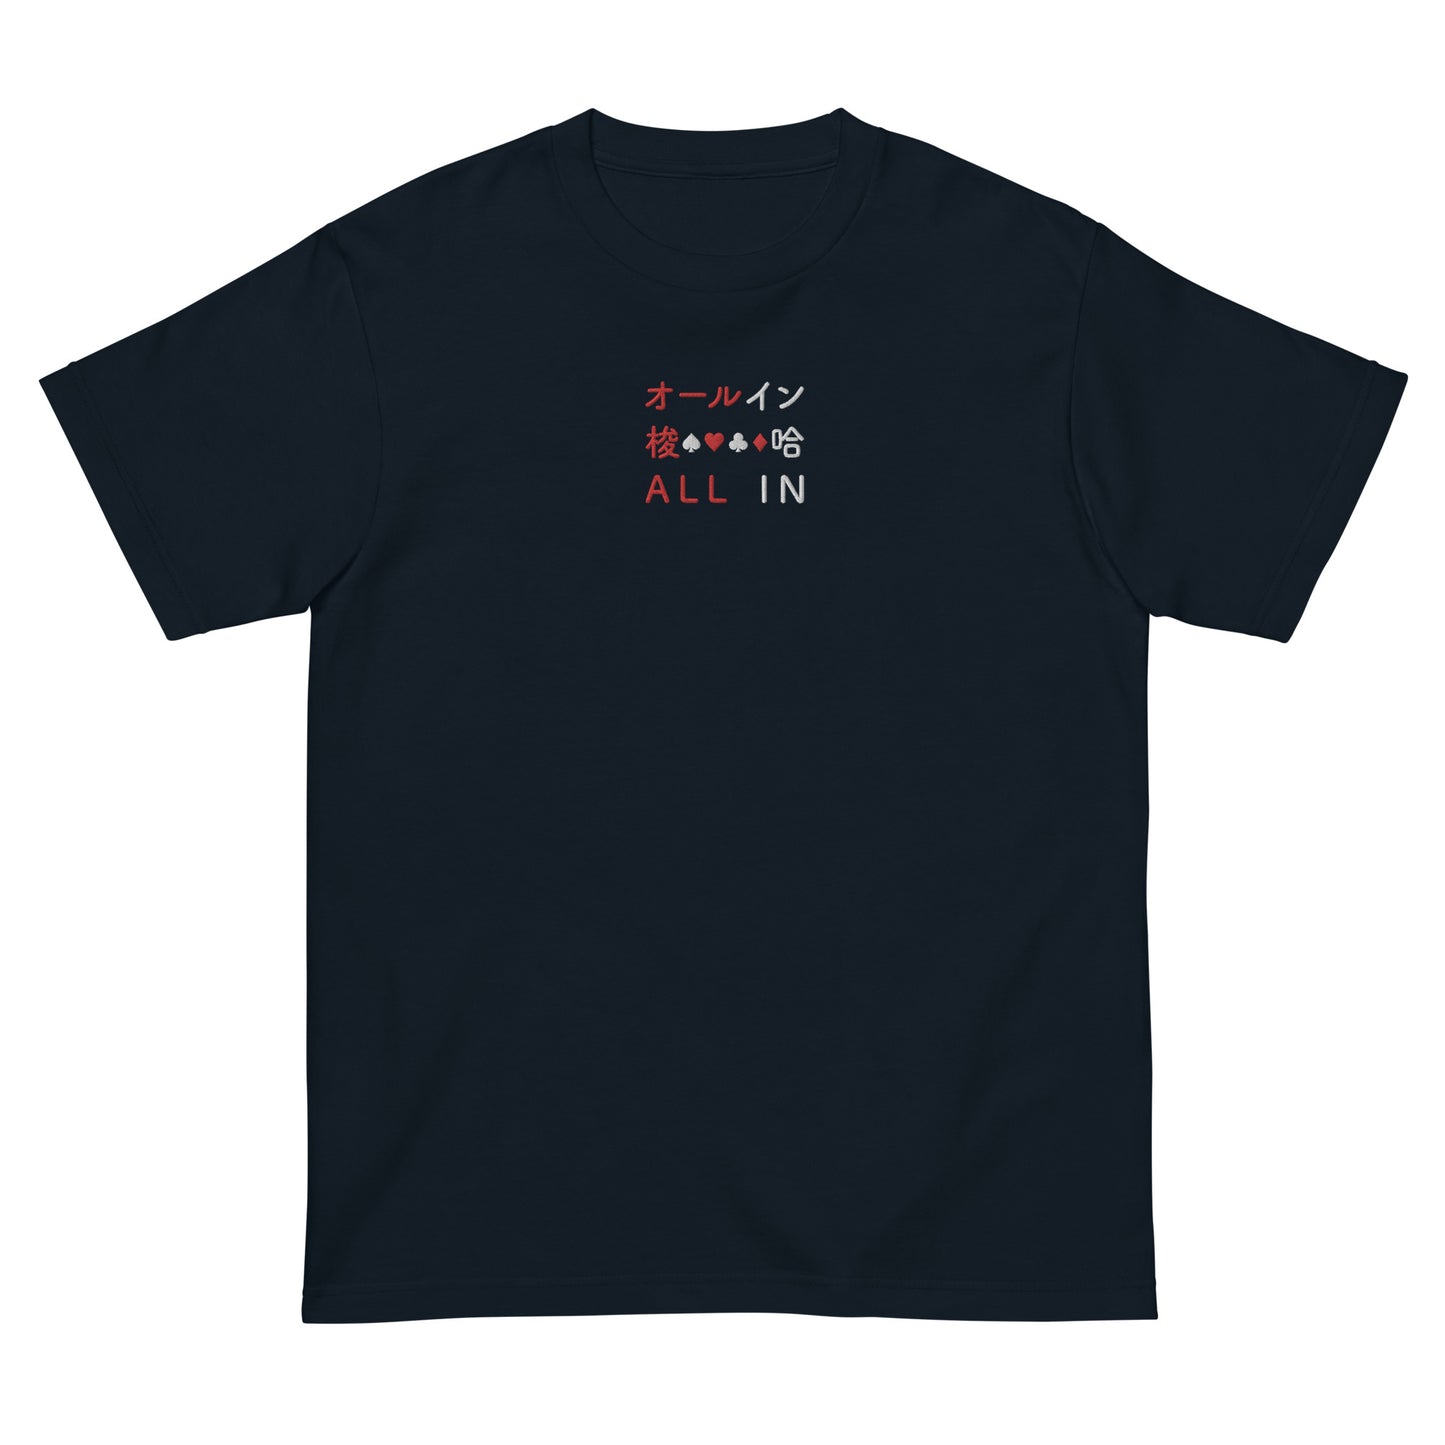 Navy High Quality Tee - Front Design with an Red, White Embroidery "All IN" in Japanese,Chinese and English